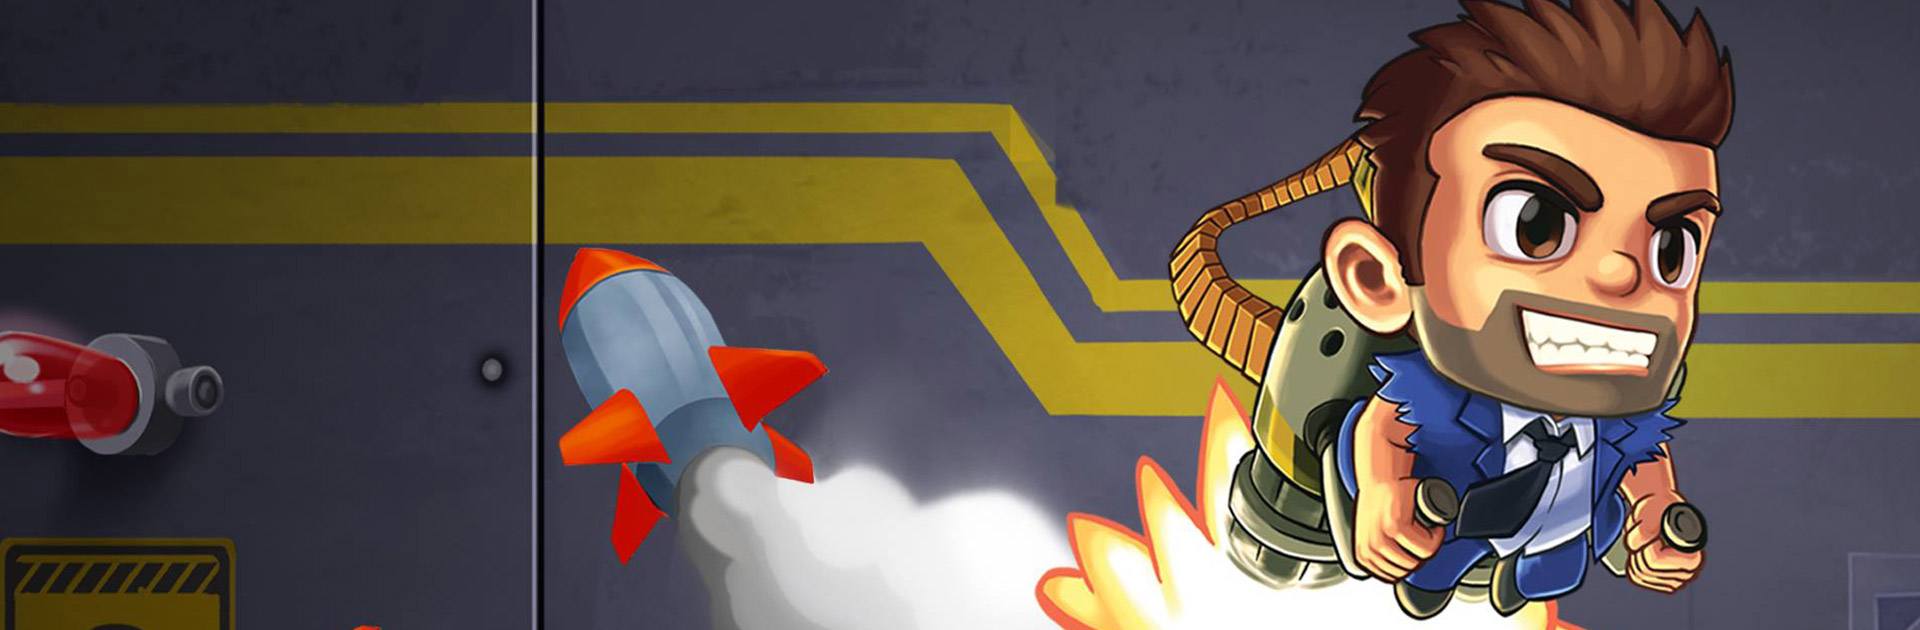 Play Jetpack Joyride Online for Free on PC & Mobile 